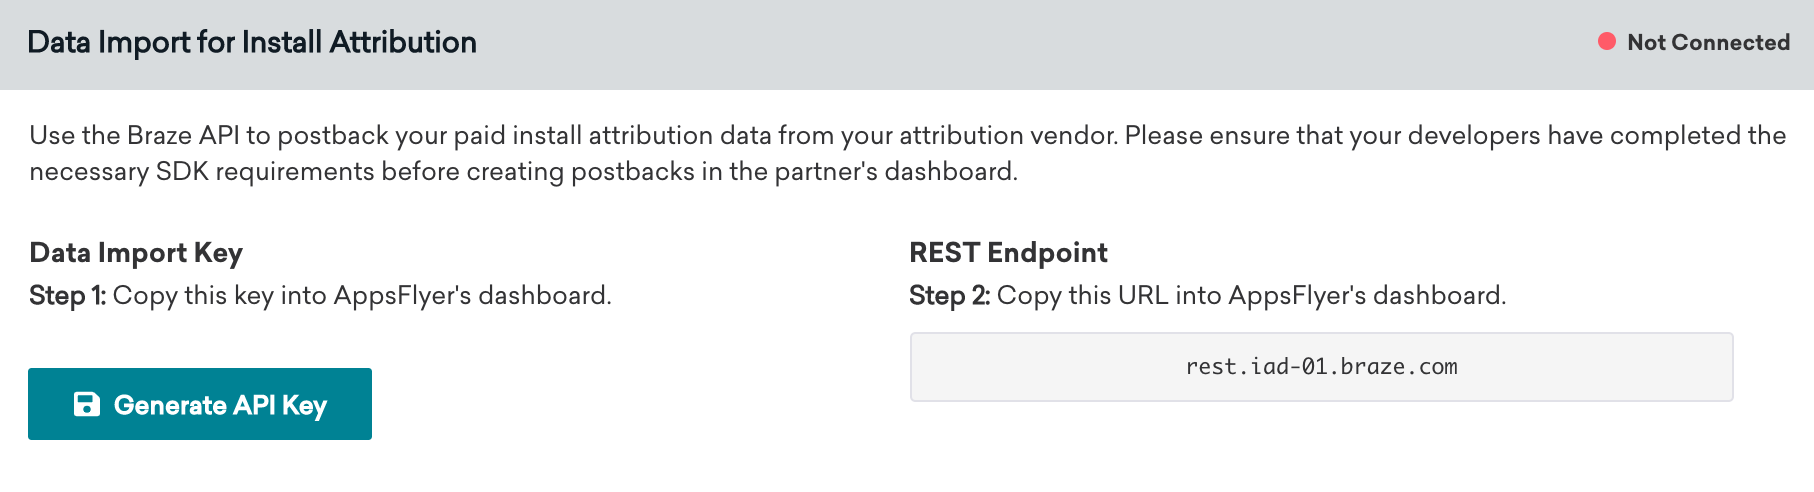 The "Data Import for Install Attribution" box available on the AppsFlyer Technology page. Inclued in this box is the data import key and the REST endpoint.